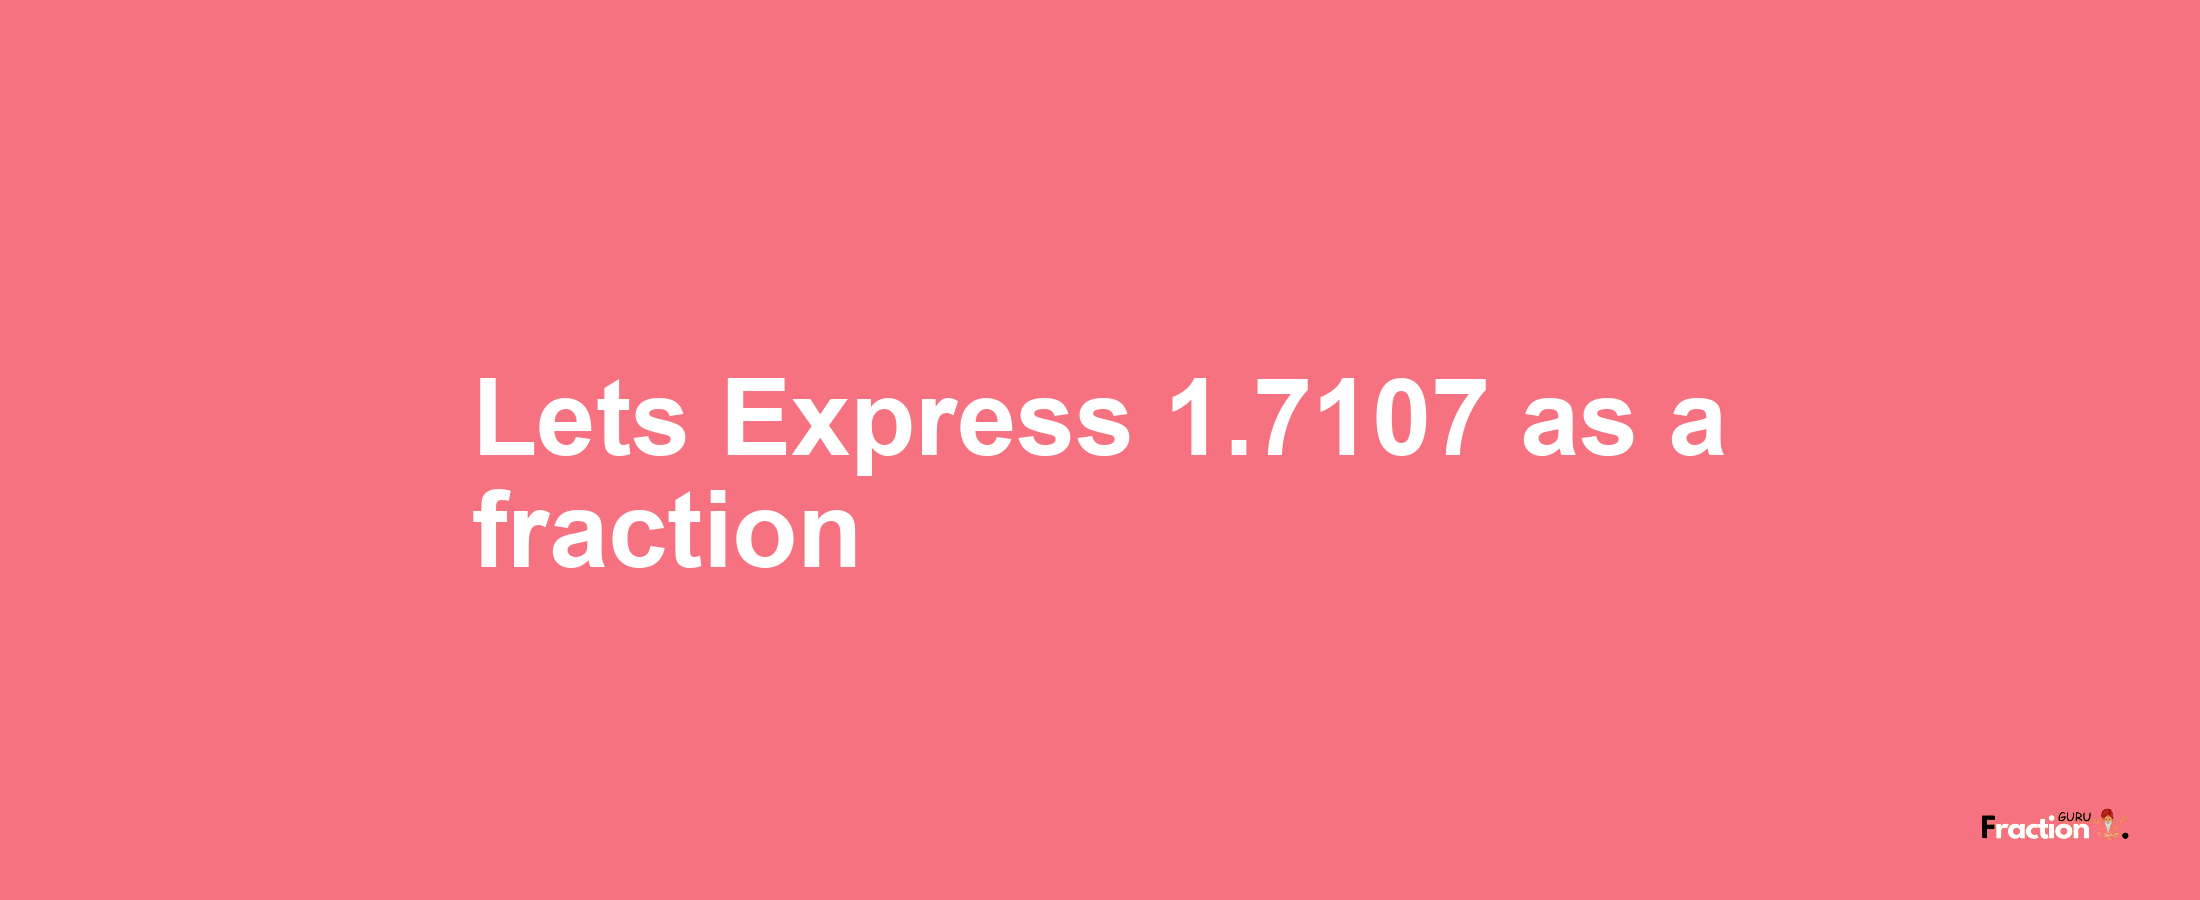 Lets Express 1.7107 as afraction